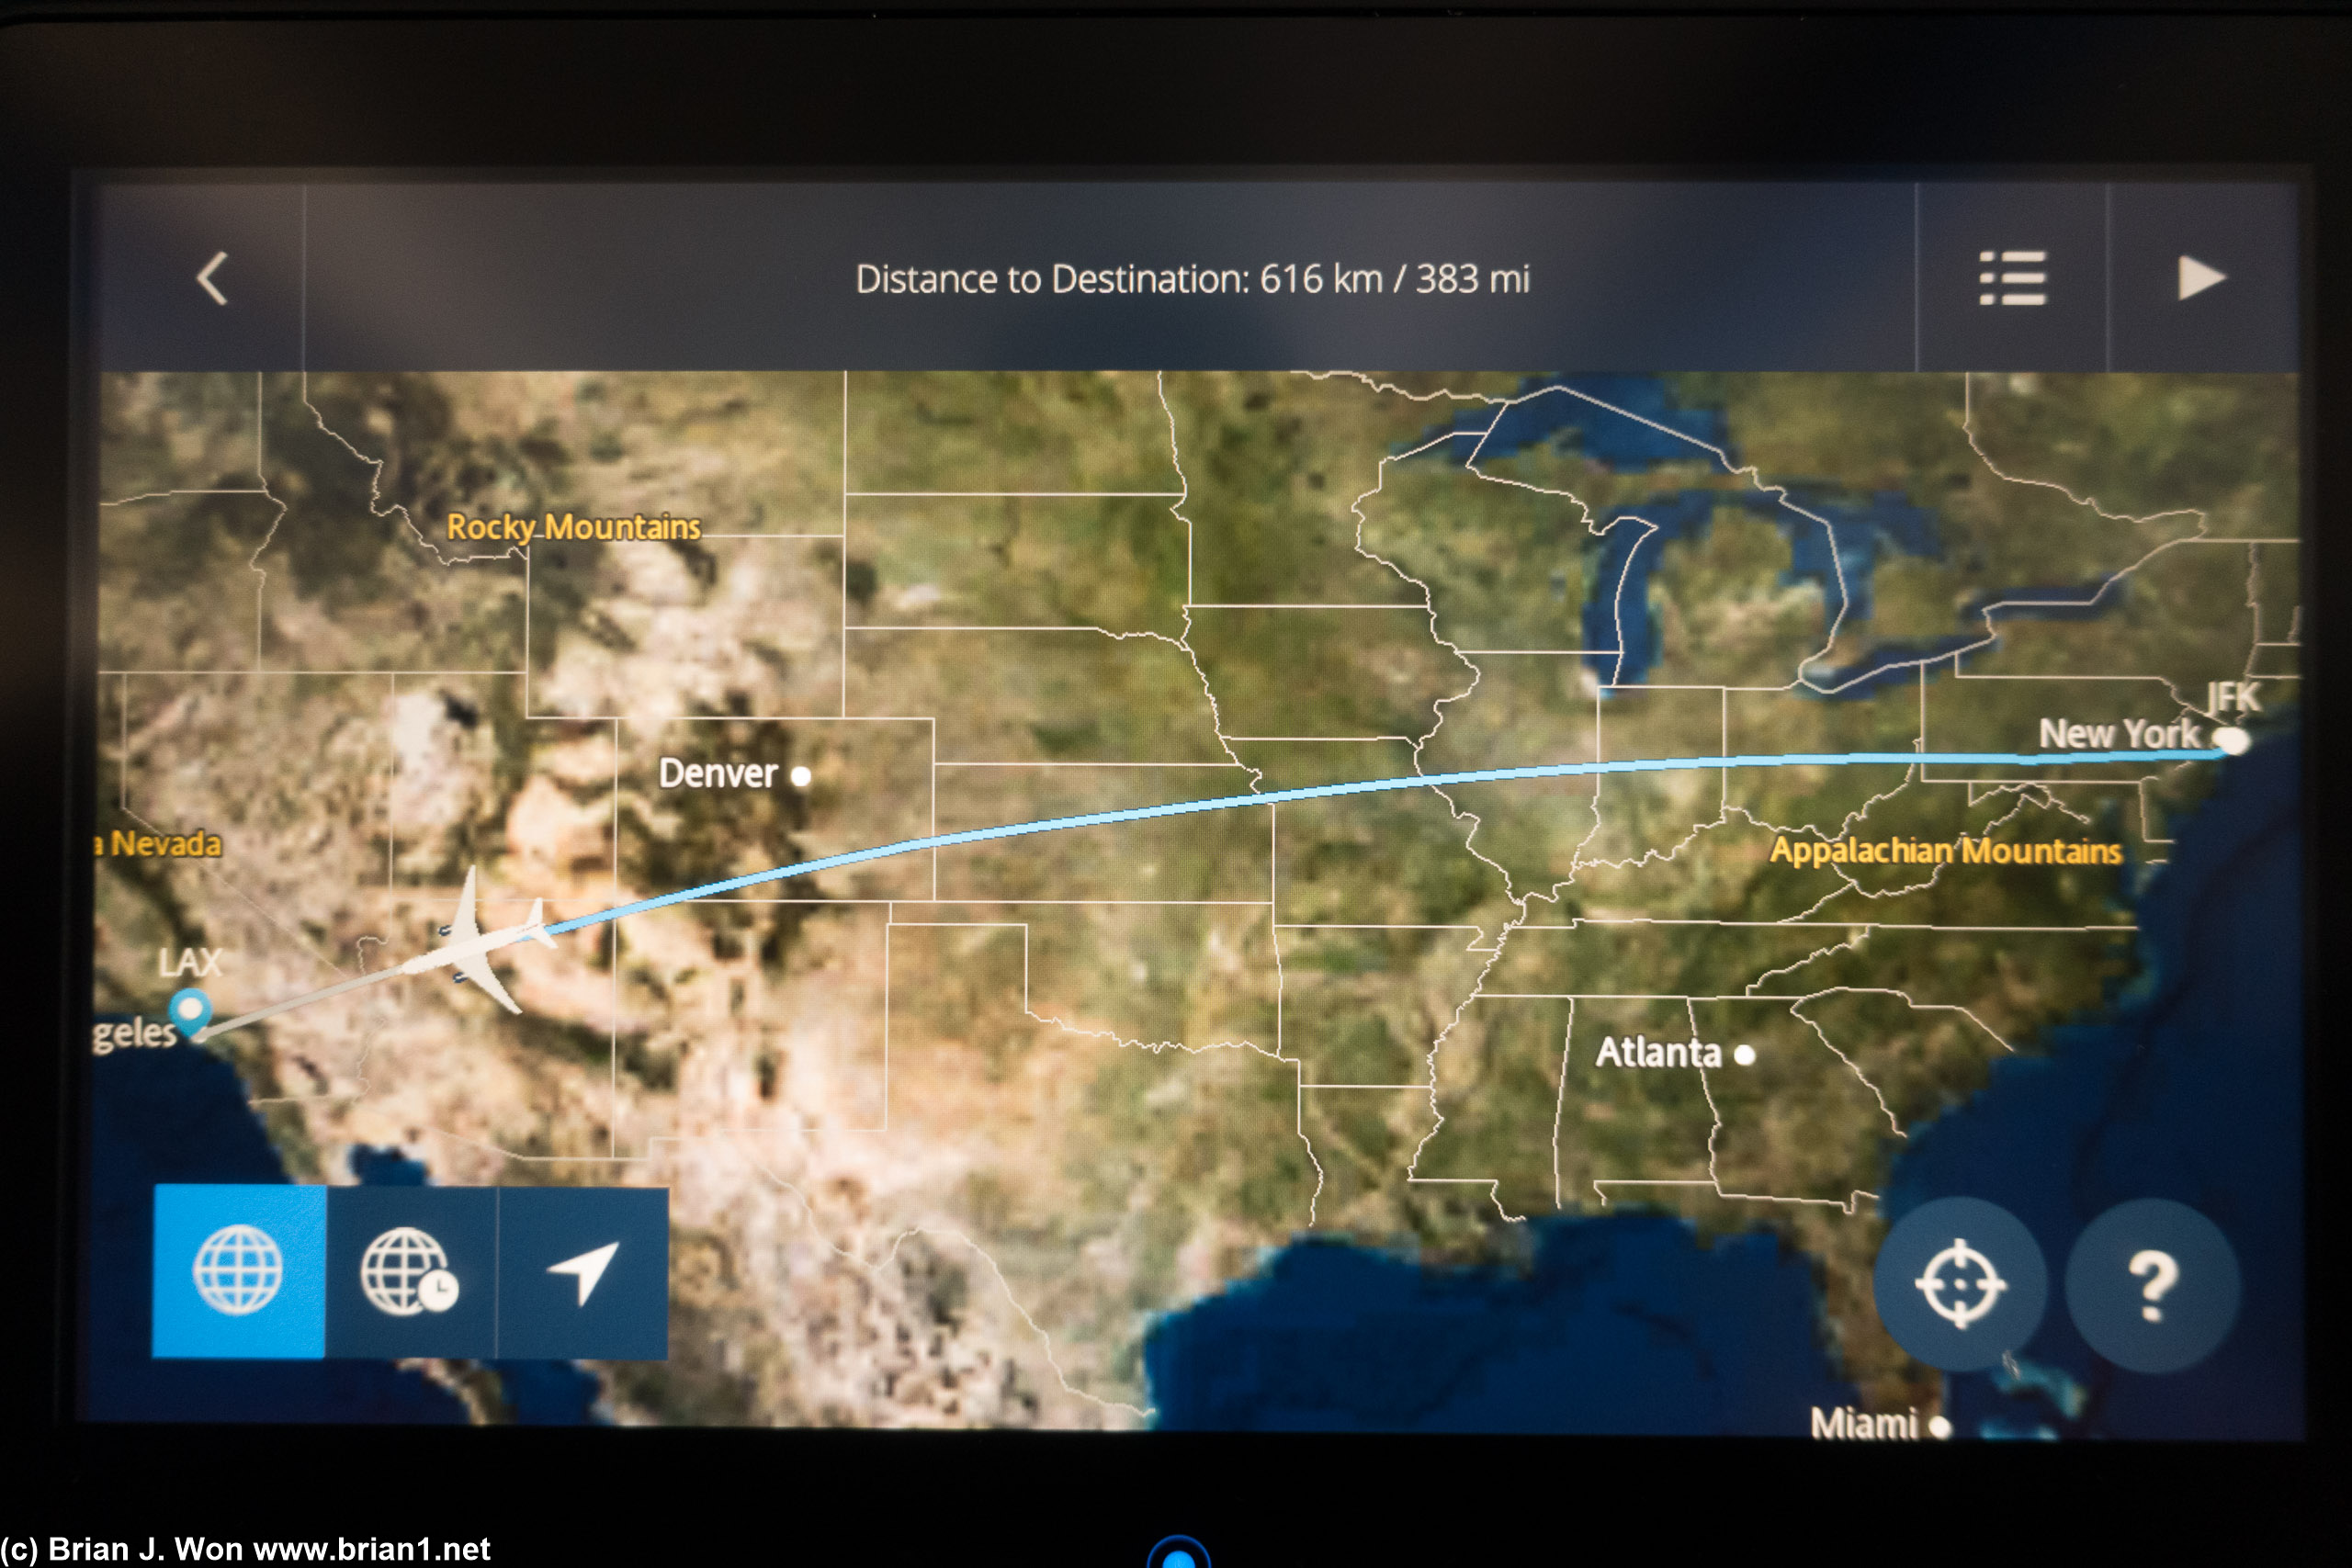 Quality of the map on Delta's 777 IFE is crap.